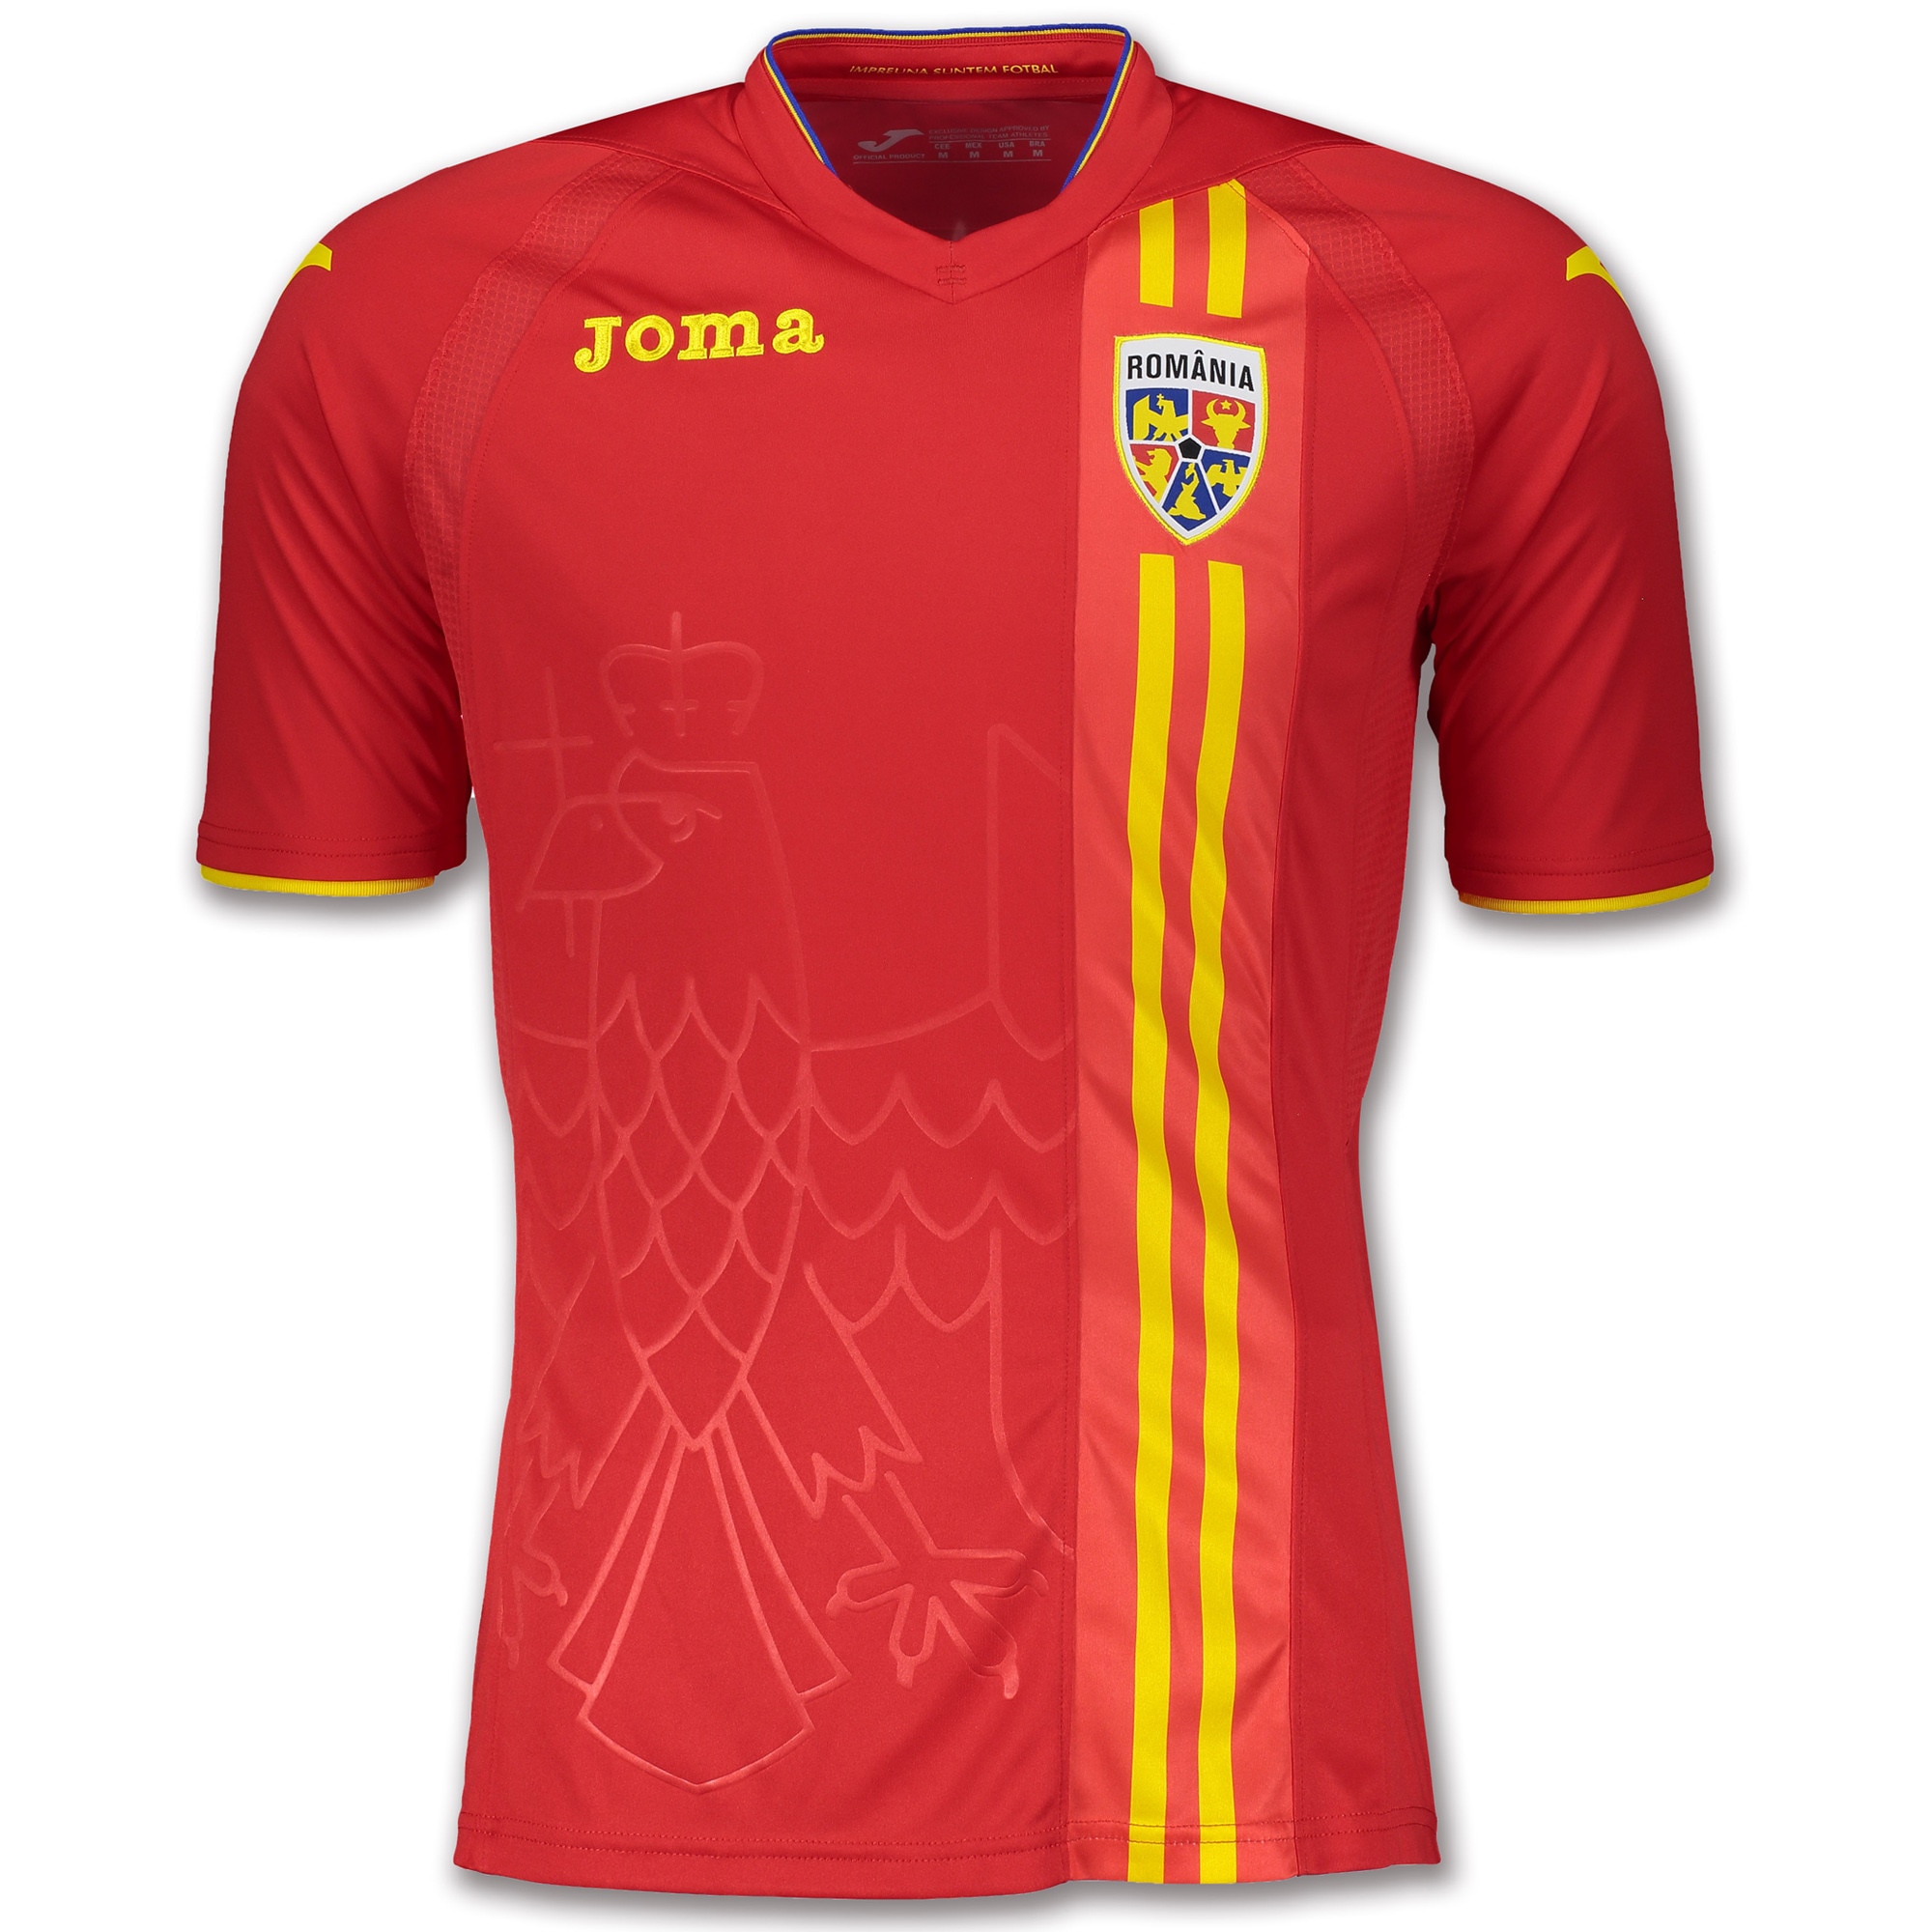 accurately door Go up and down Tricou echipa nationala a Romaniei Joma 2018,rosu, XL - eMAG.ro